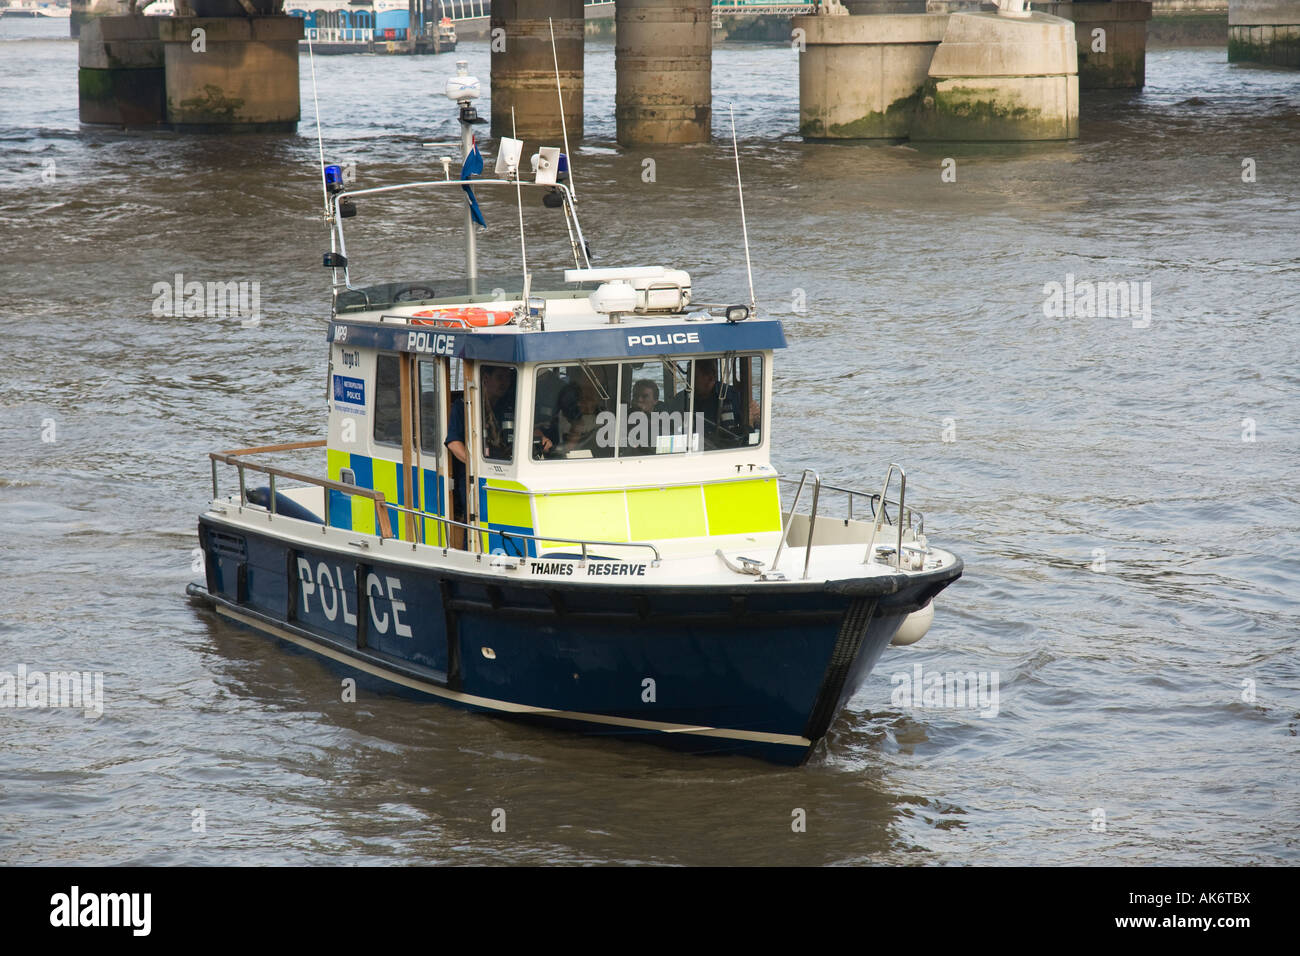 London Thames river police boat at Westminster Stock Photo